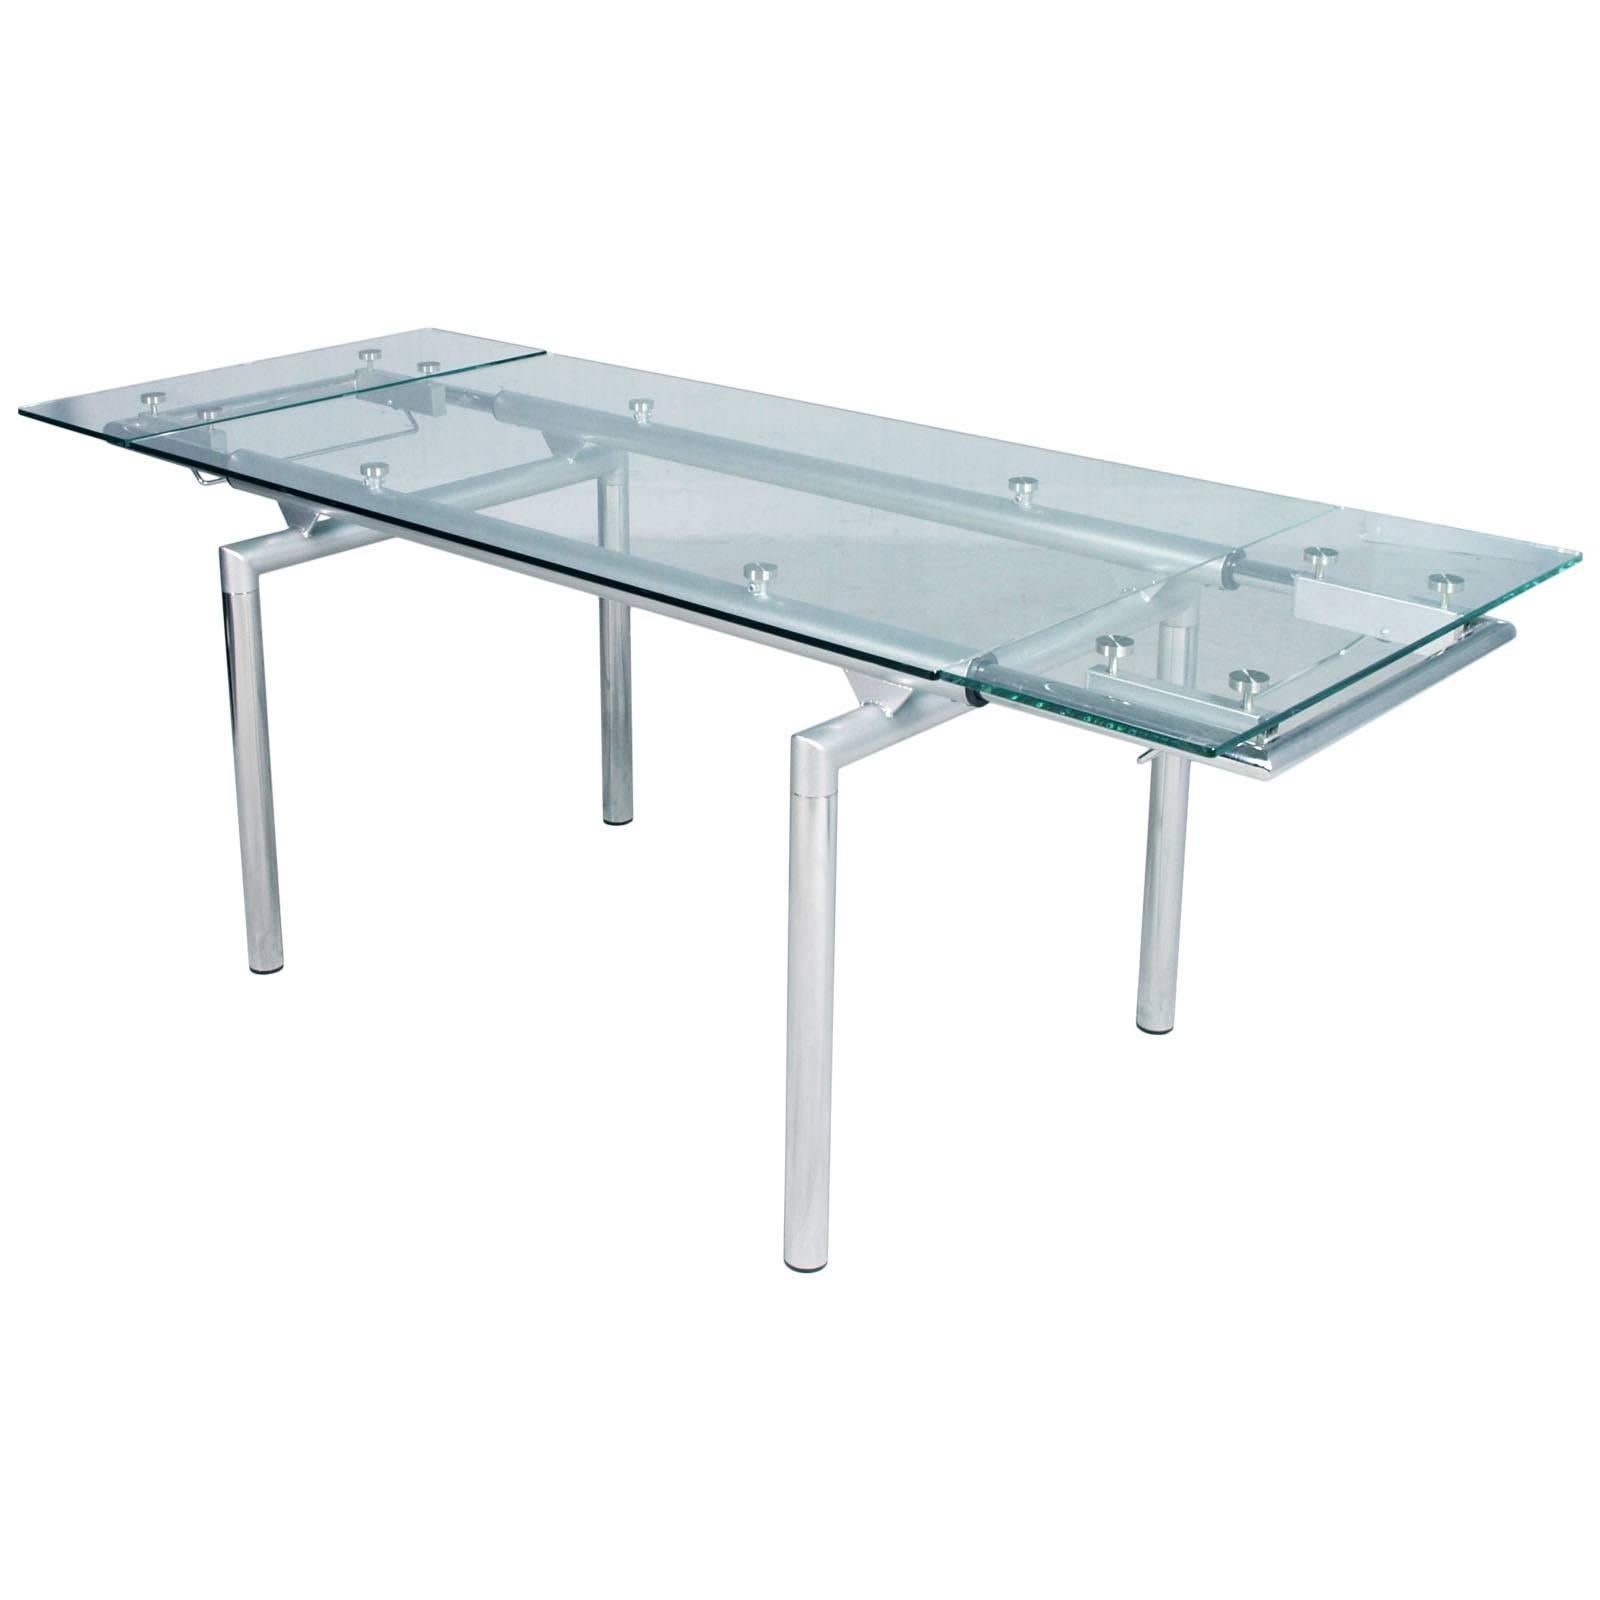 Italian 1980s chromed and crystal extensible Tecno-table, Le Corbusier style.
Produced by Tecno SpA based on a Norman Foster project
The two extendable parts can be moved with a manually operated cylinder mechanism with an eccentric device for the